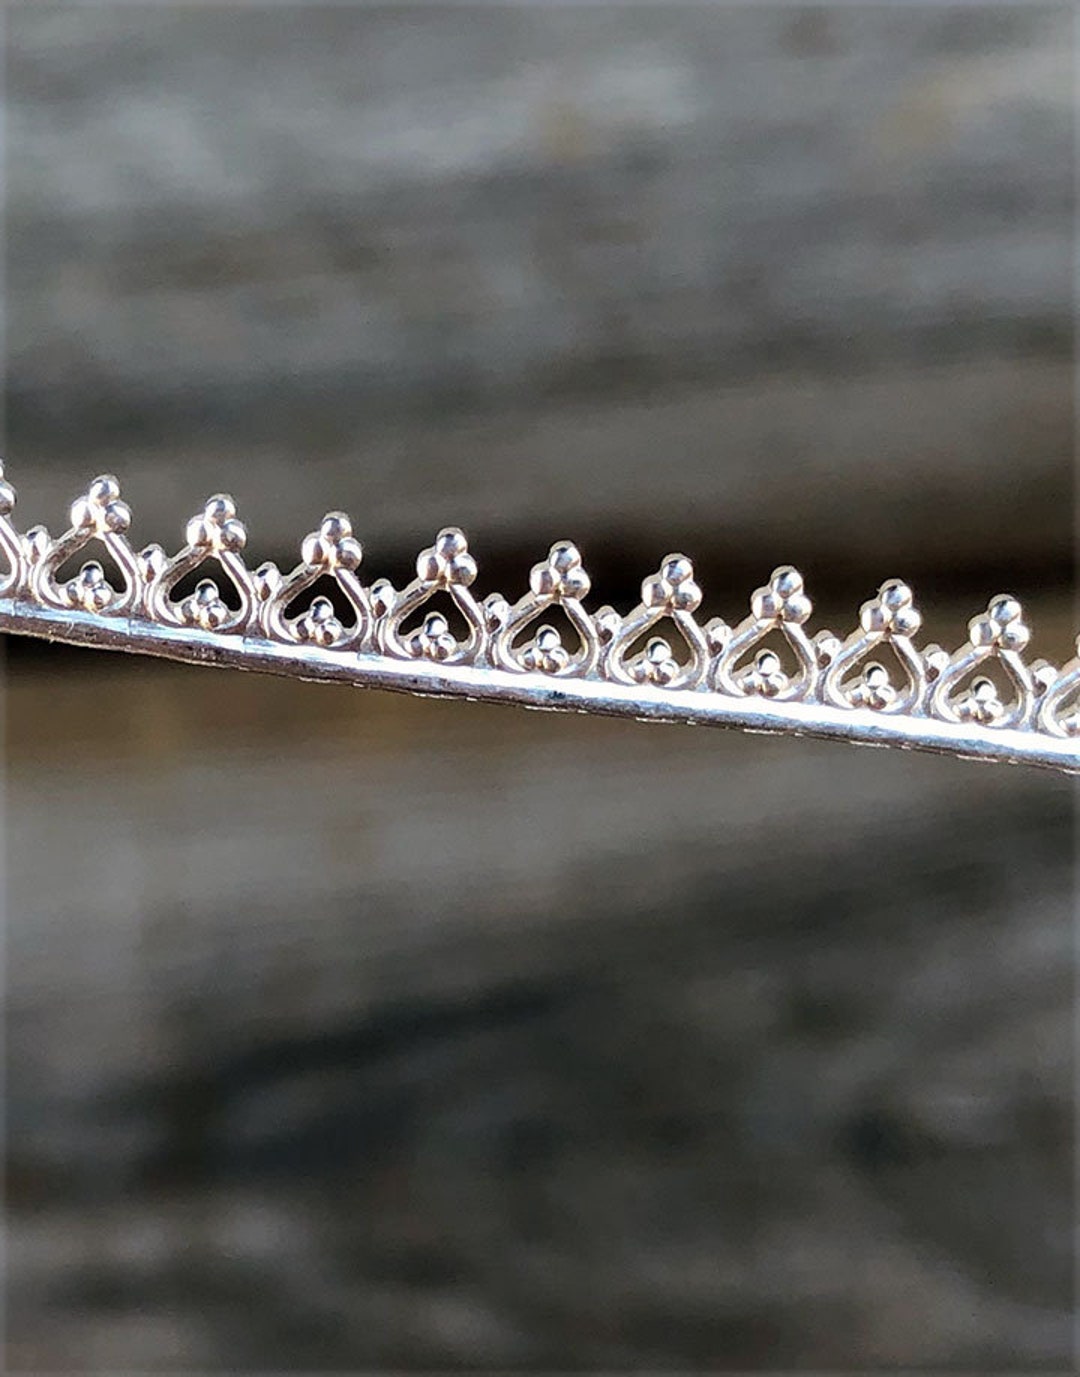 SPW21 = Pattern Wire Smooth and Beaded Twist Sterling Silver (Inch) 2.3mm,  11ga - FDJ Tool